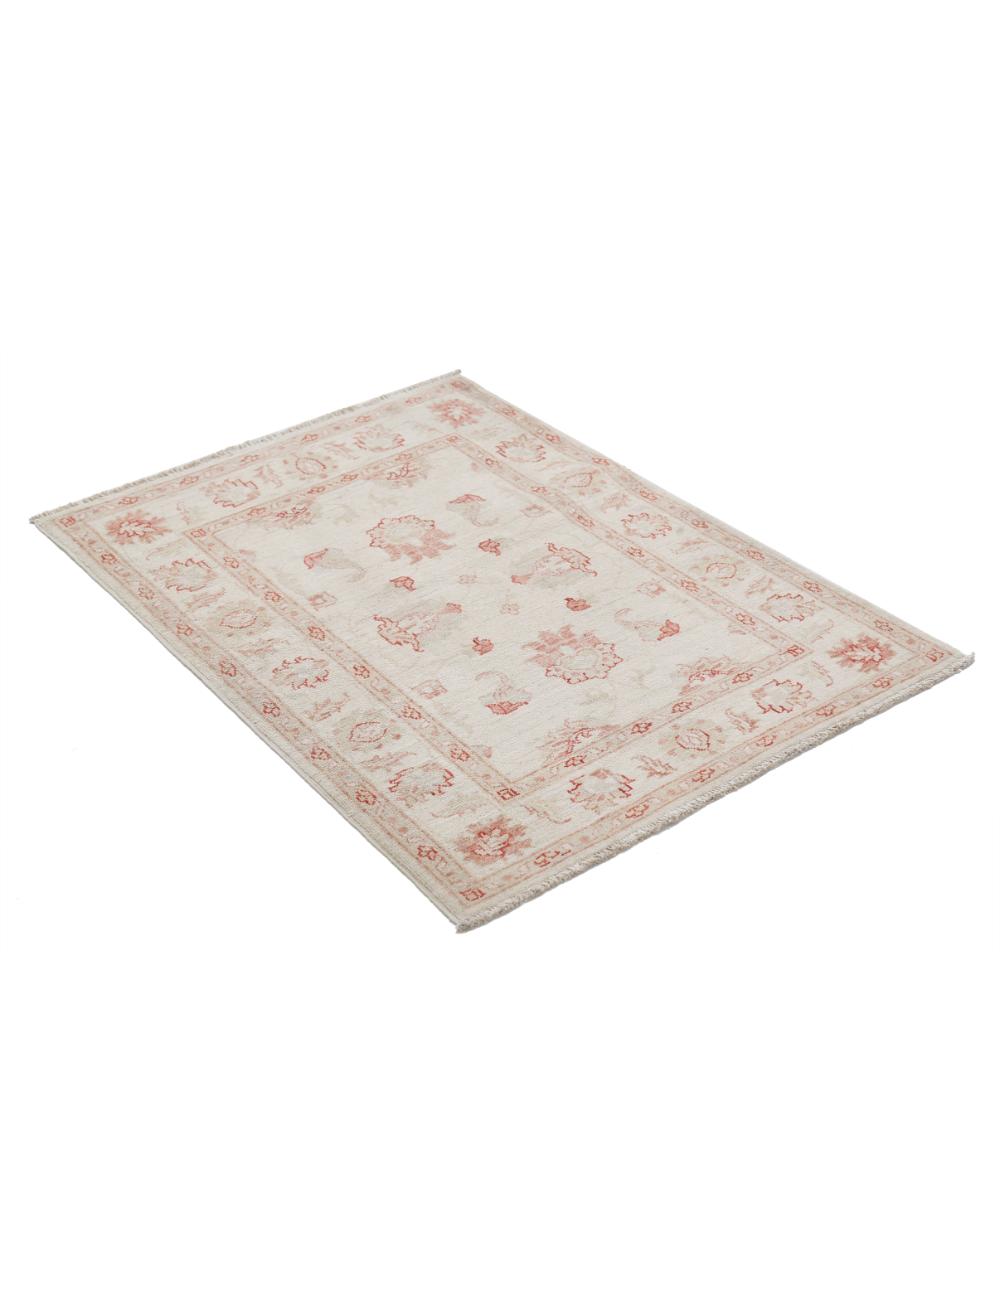 Ziegler 2' 9" X 3' 9" Hand-Knotted Wool Rug 2' 9" X 3' 9" (84 X 114) / Ivory / Red